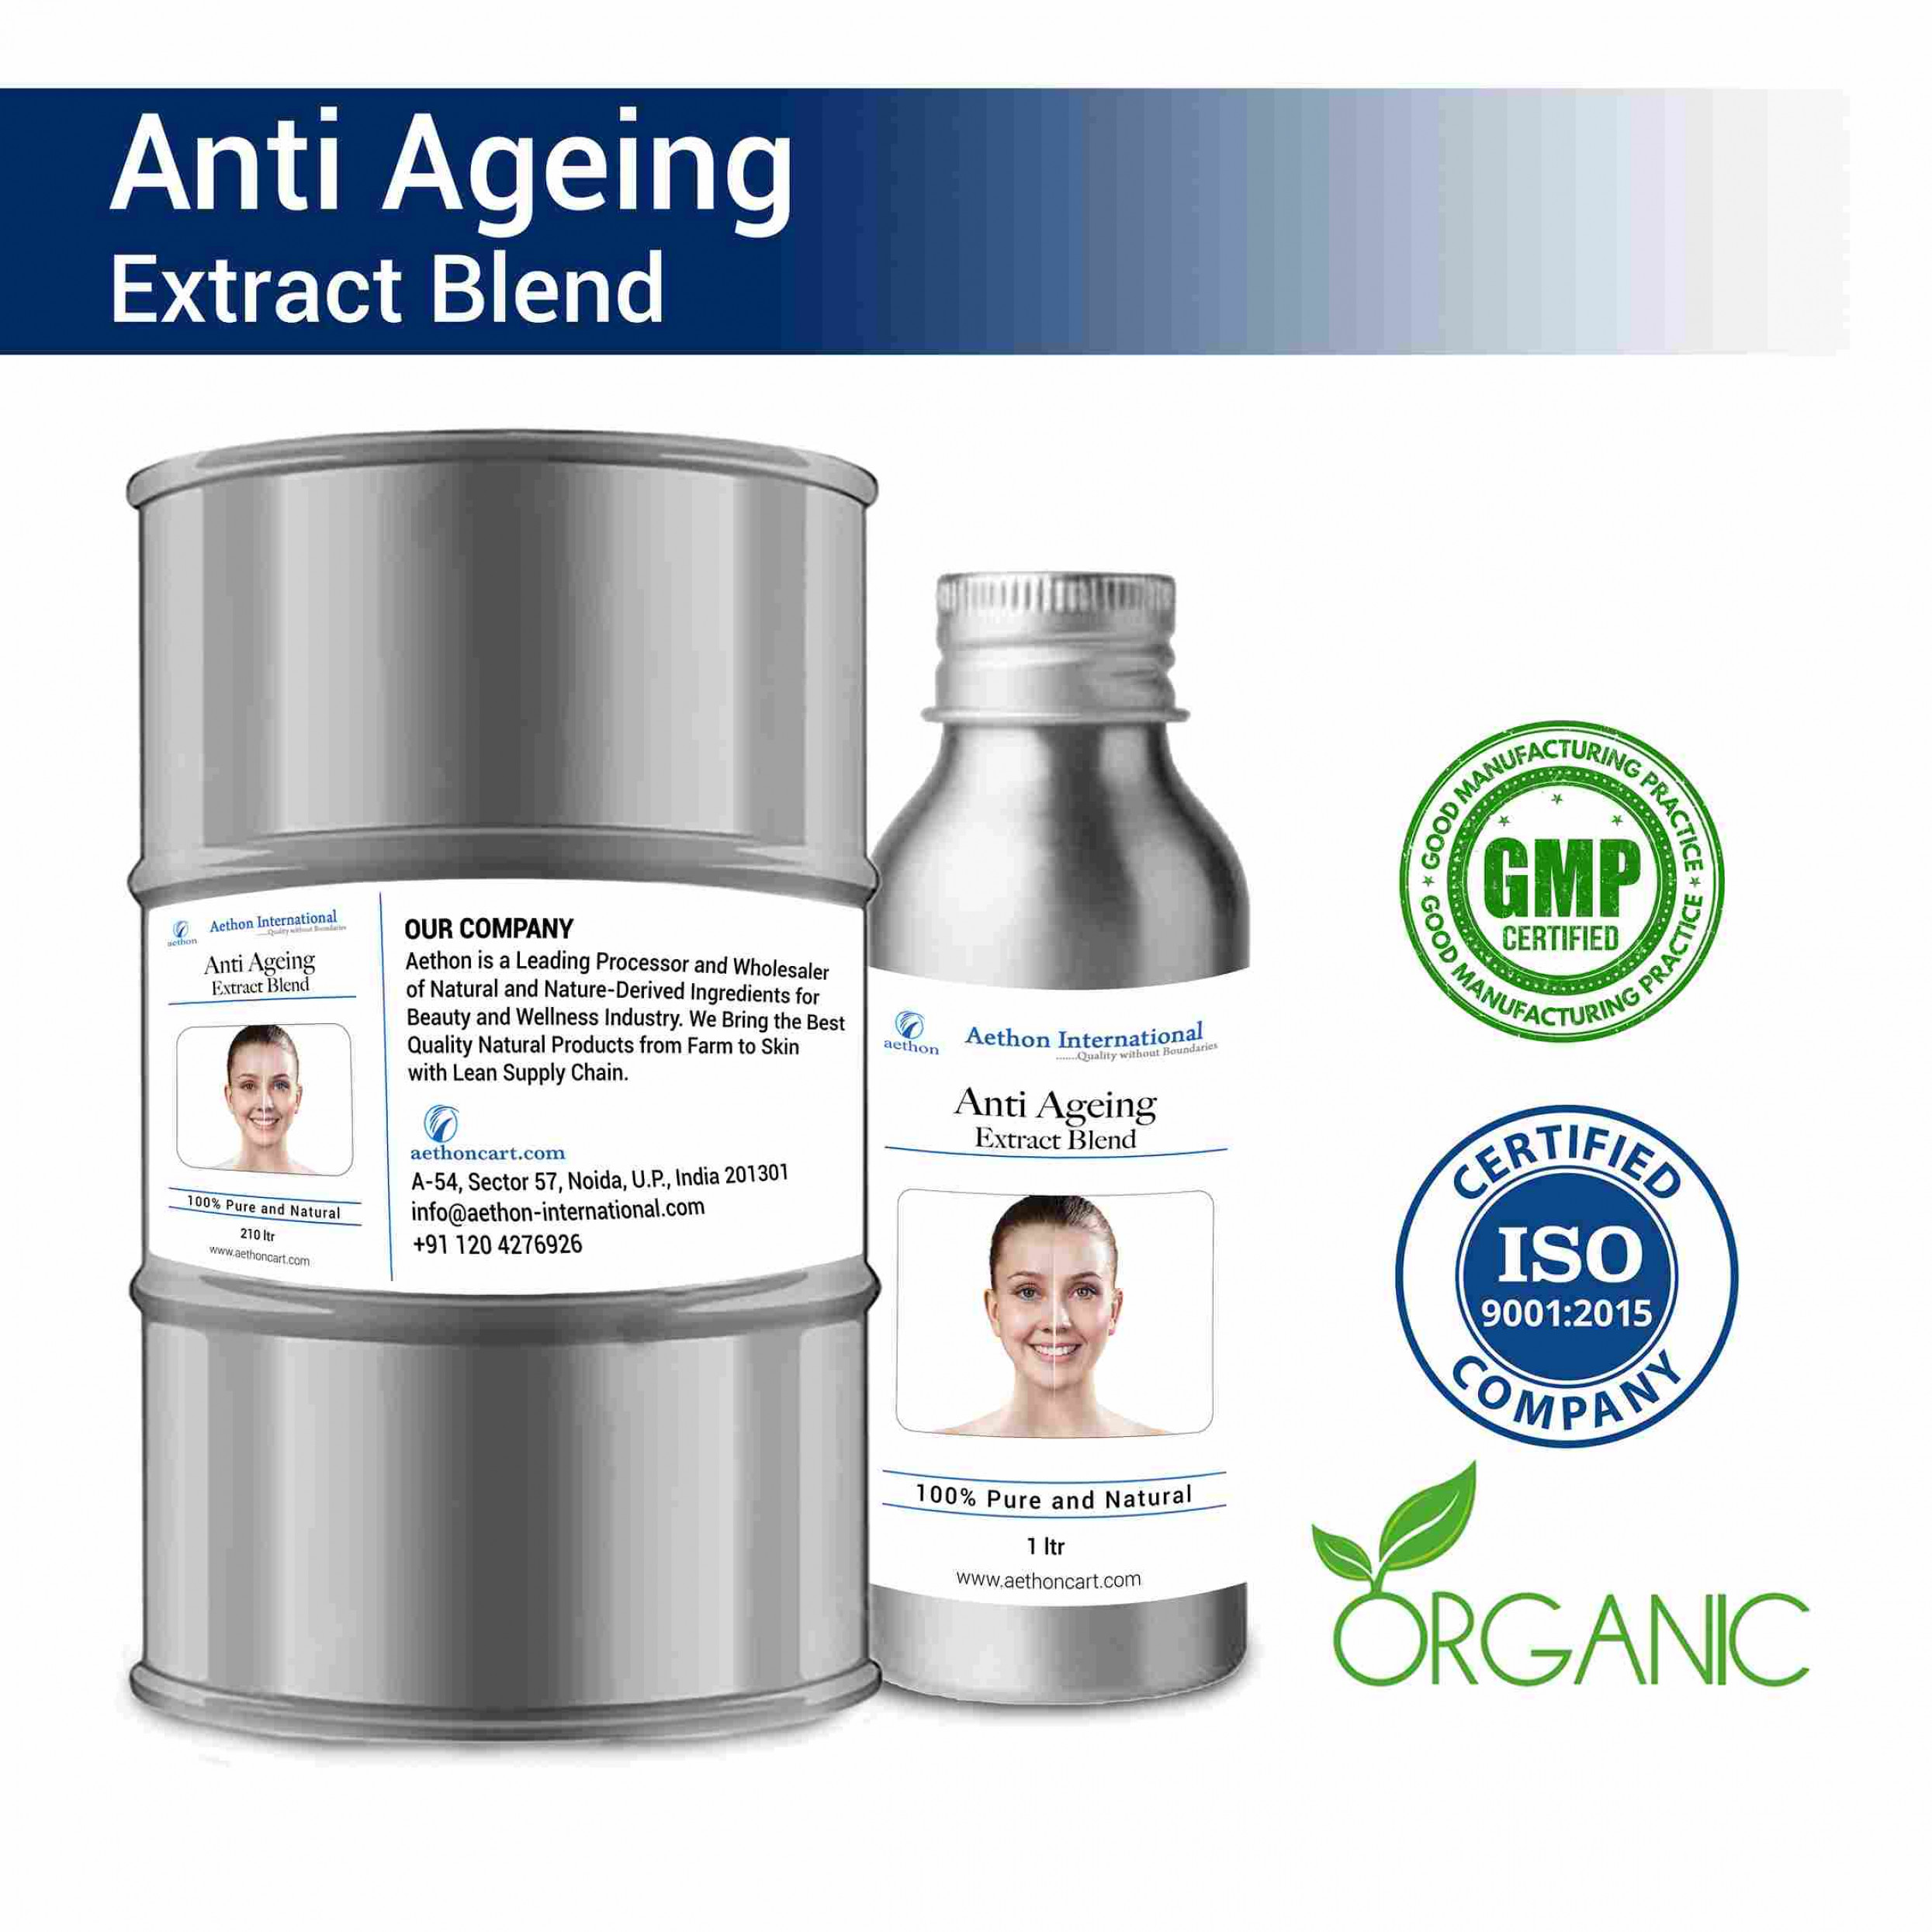 Anti Ageing Extract Blend (Oil)